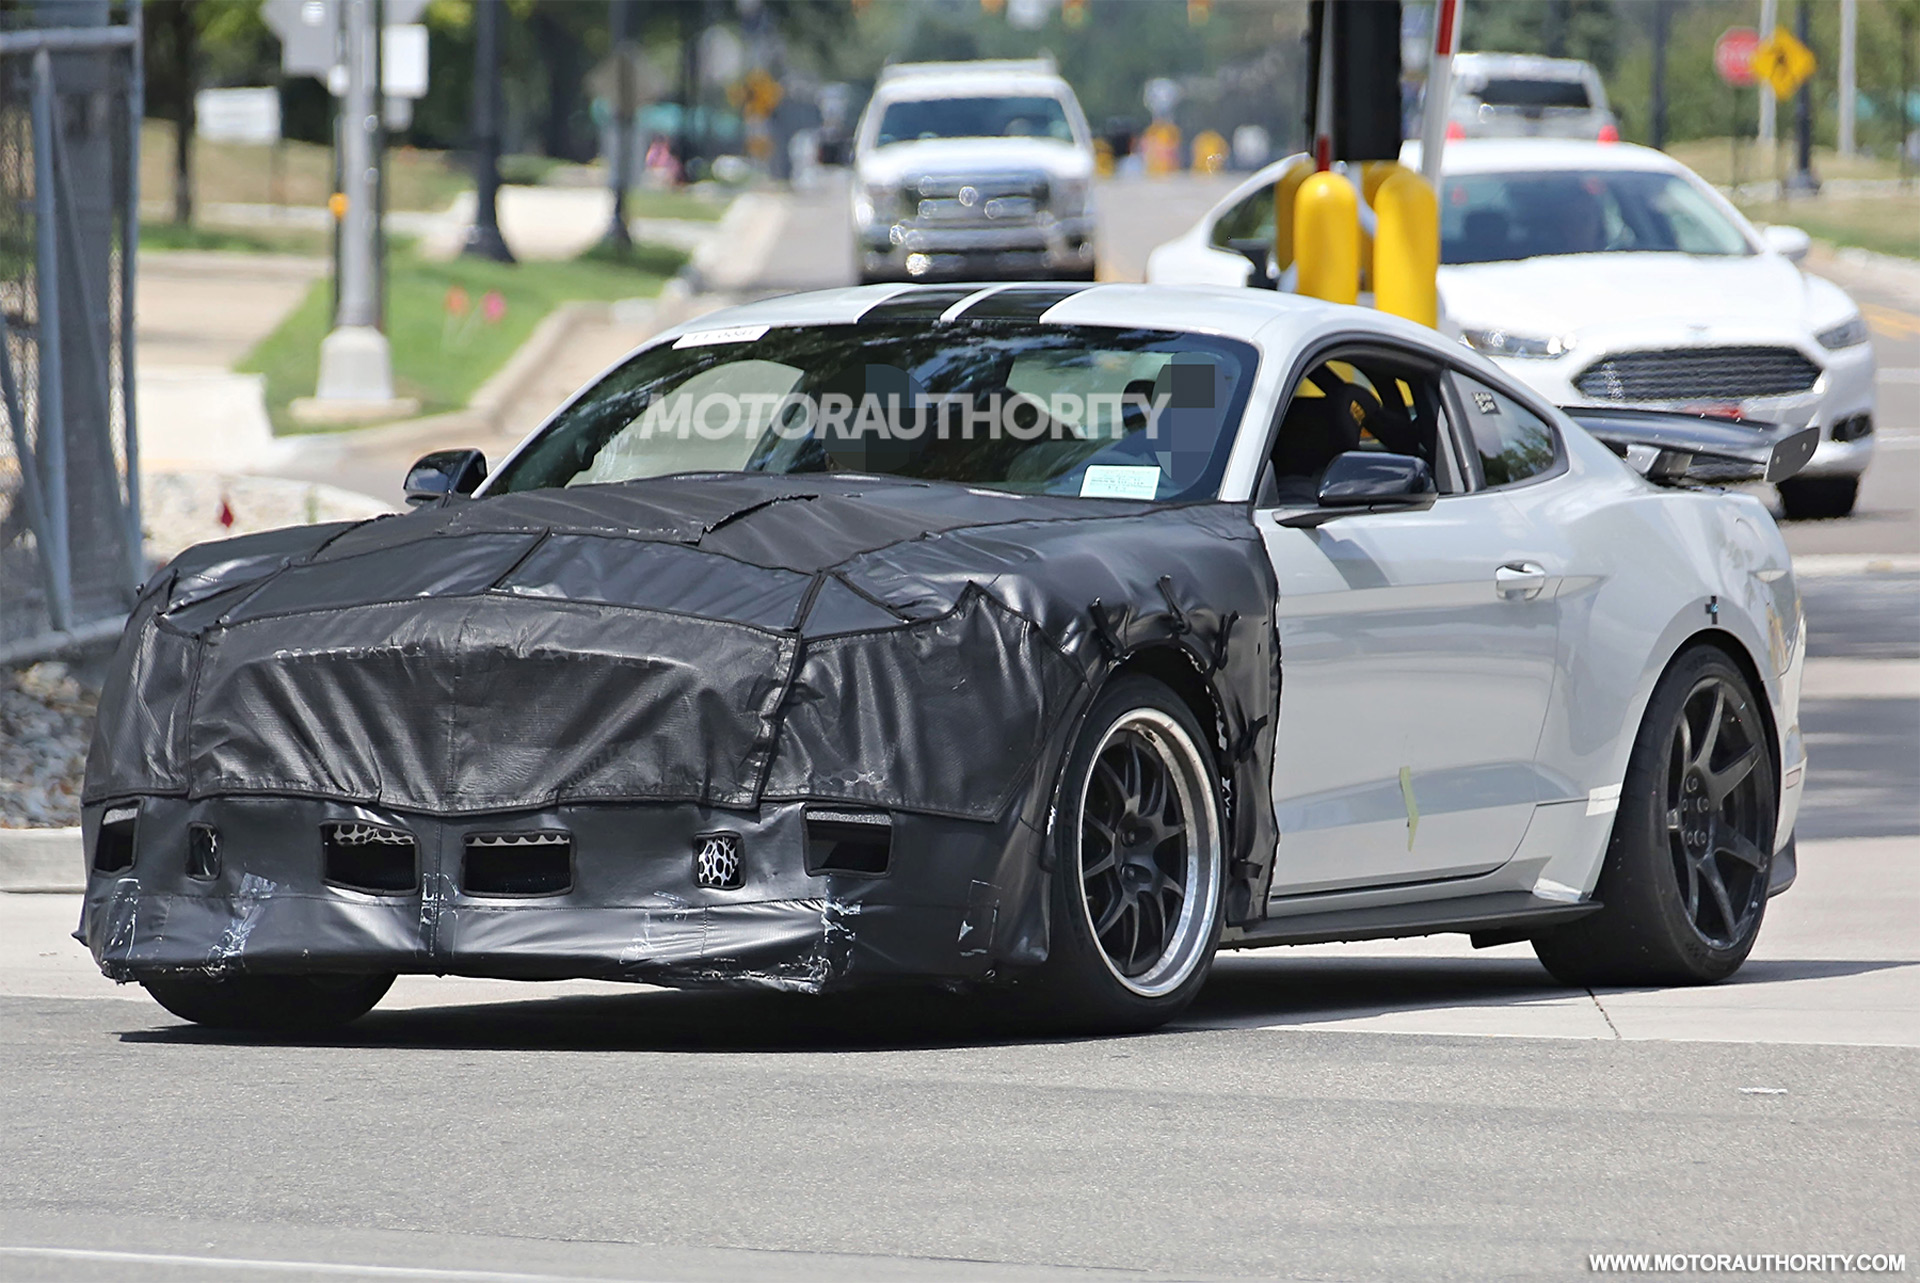 2020 Ford Mustang Shelby GT500 spy shots and video